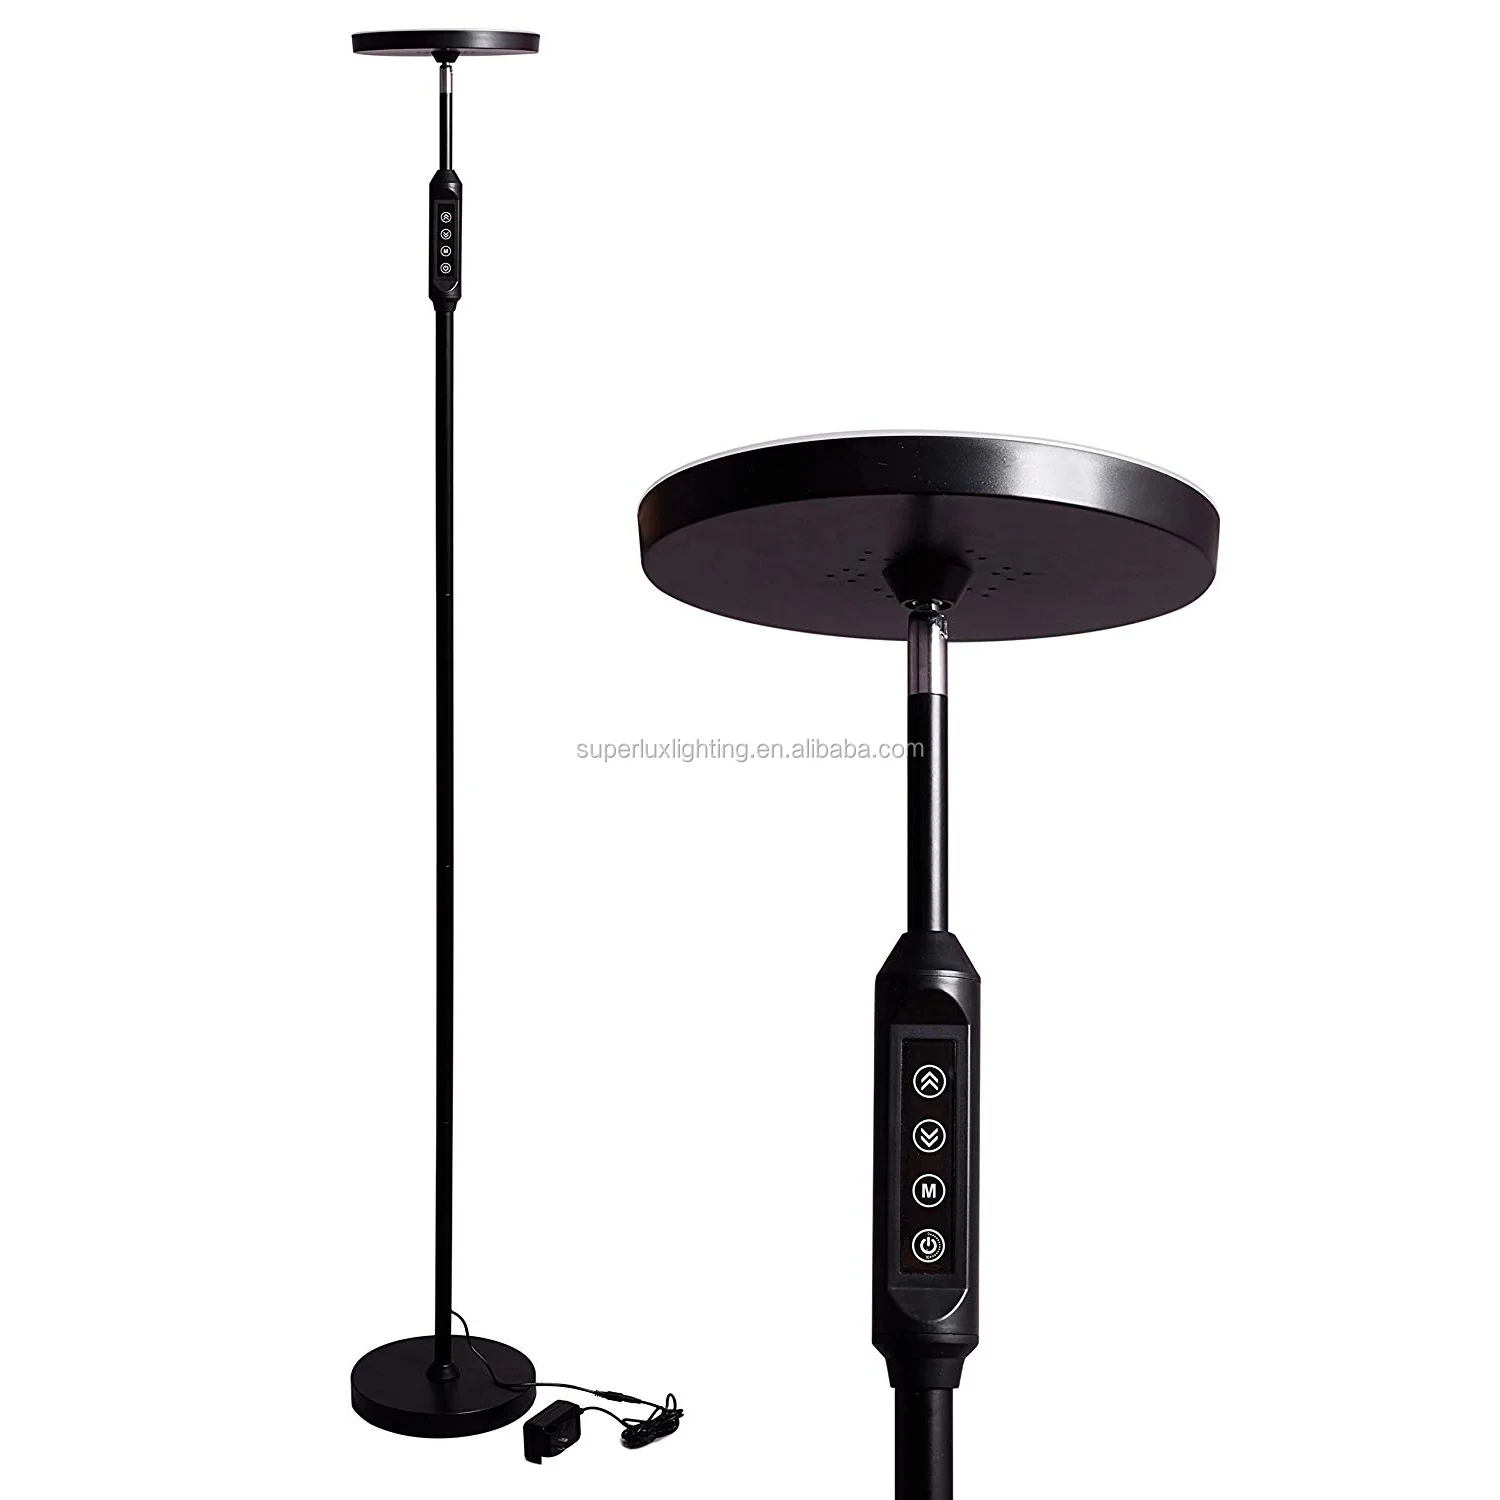 dimmable uplight LED torchiere floor lamp